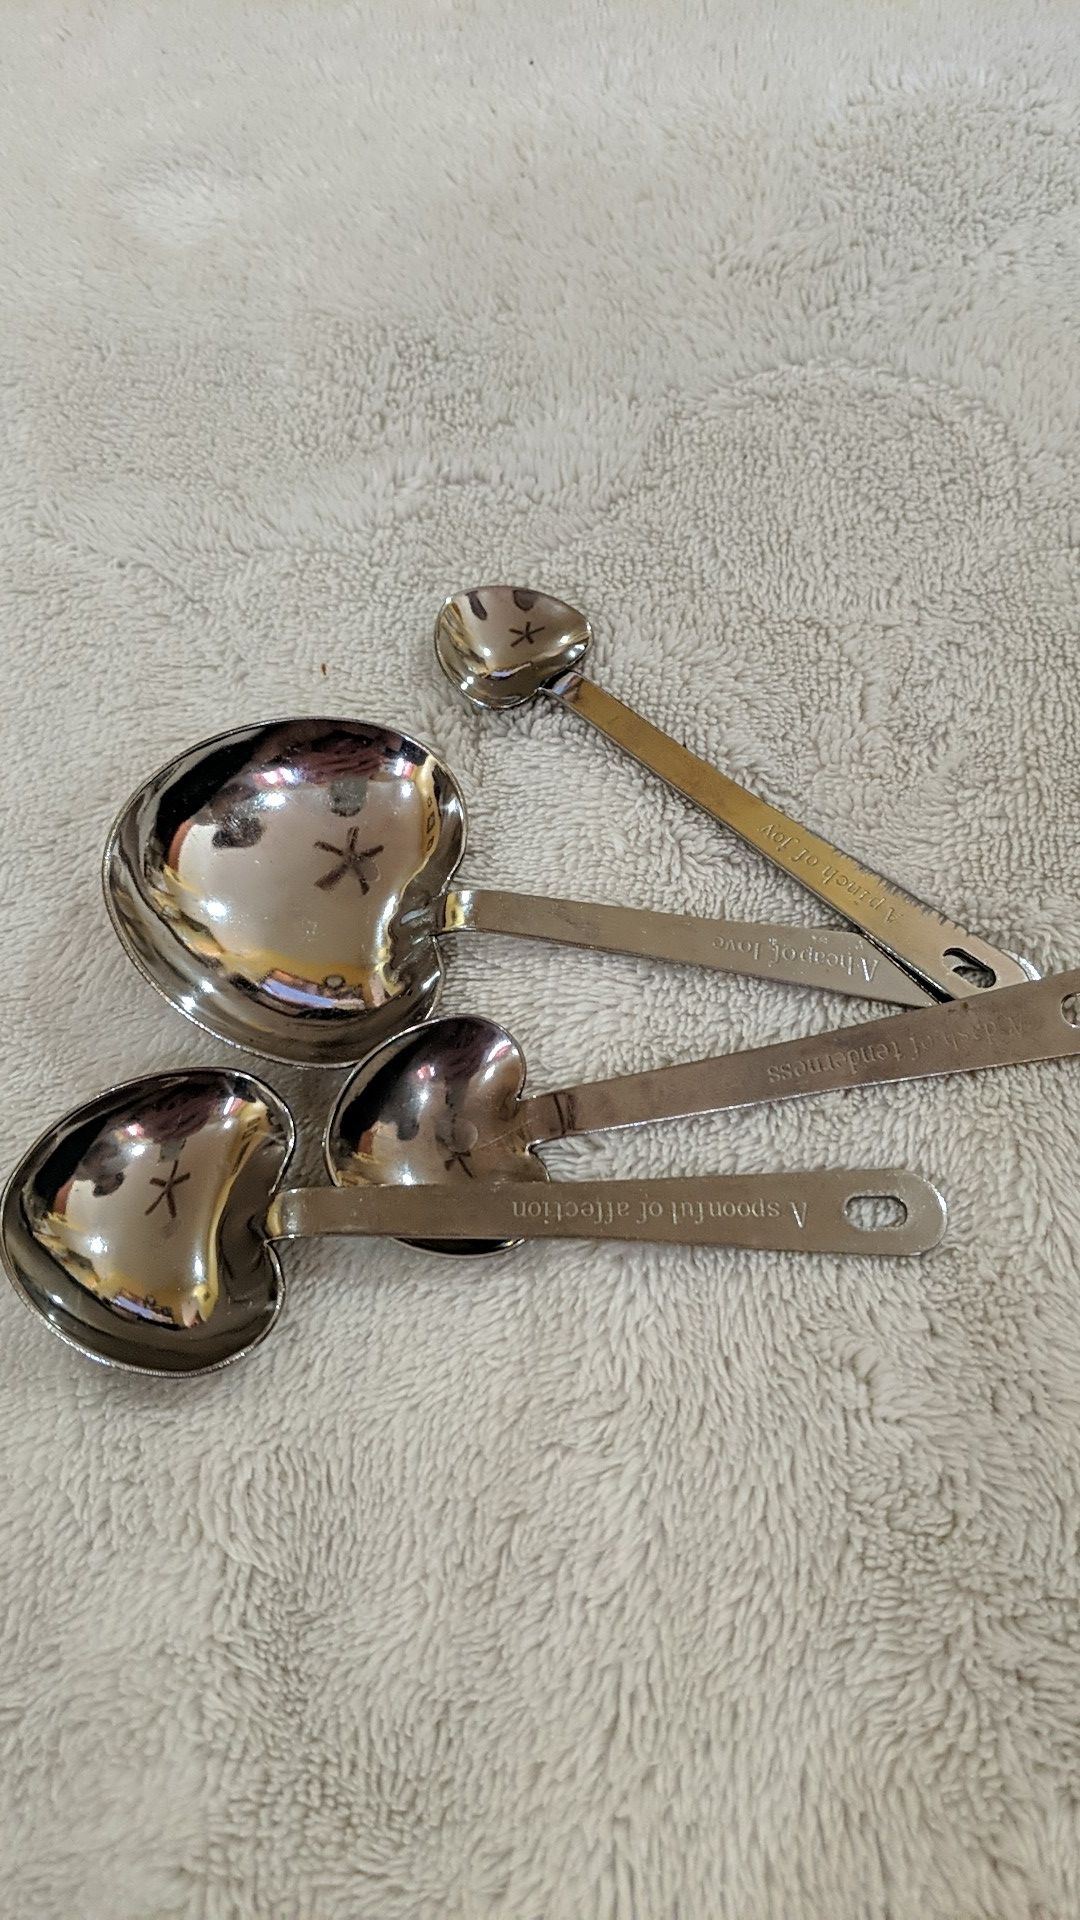 Heart-shaped measuring spoons